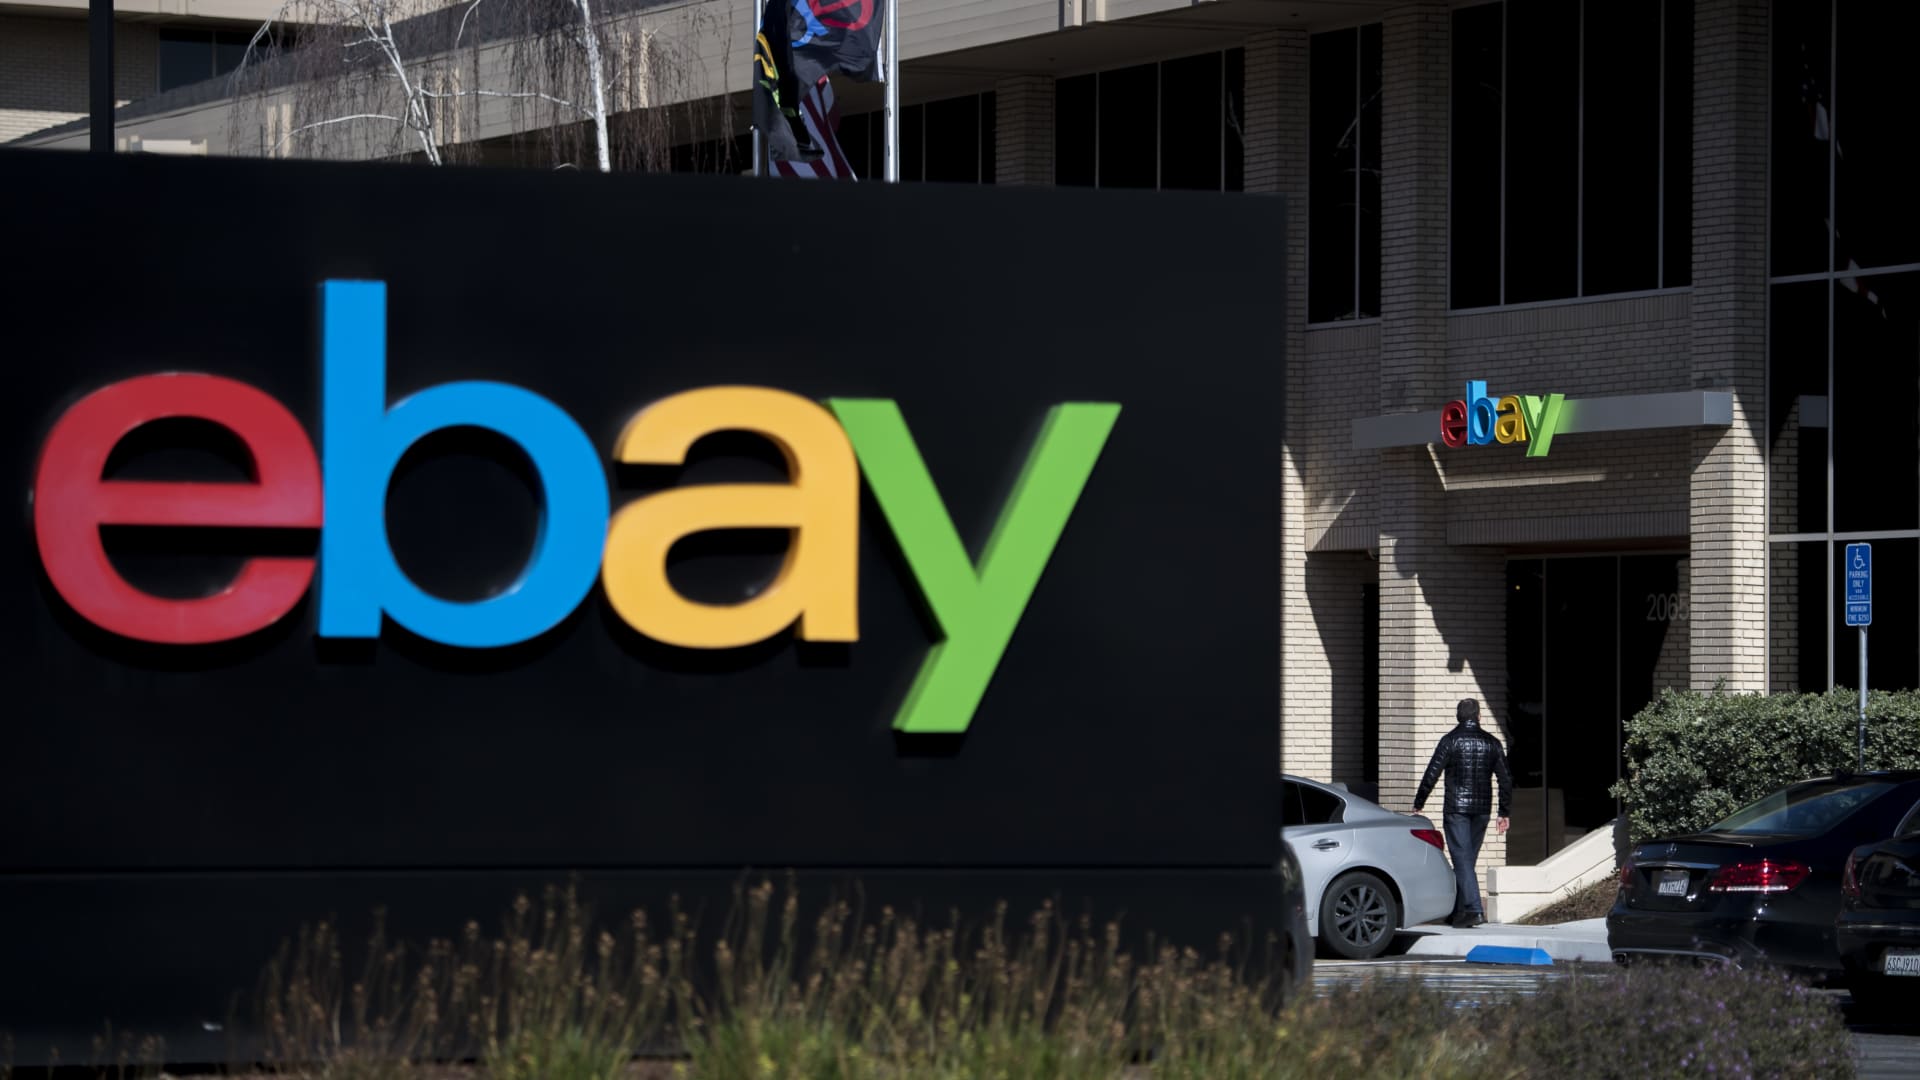 EBay to eliminate about 1,000 jobs, or 9% of full-time workforce